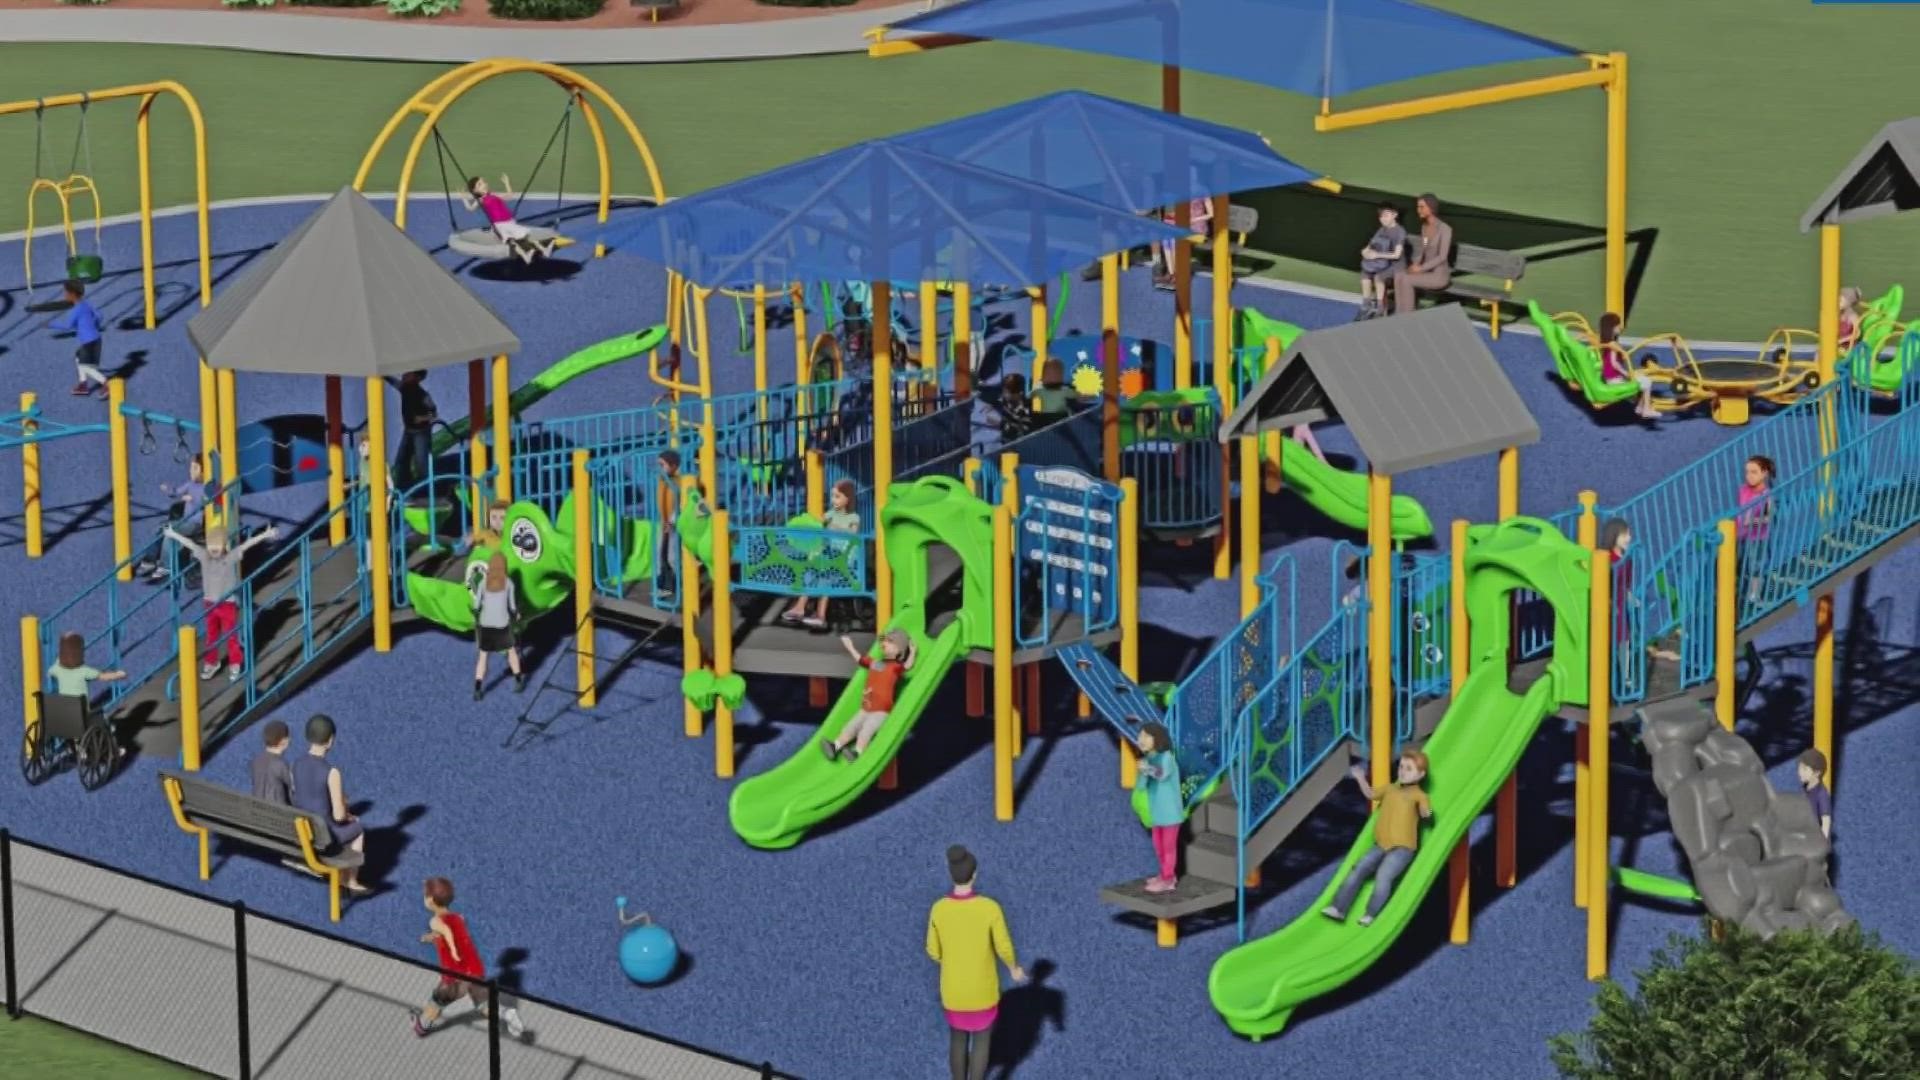 In Campbell County, a nonprofit is raising money to continue building an all-inclusive playground in the community.